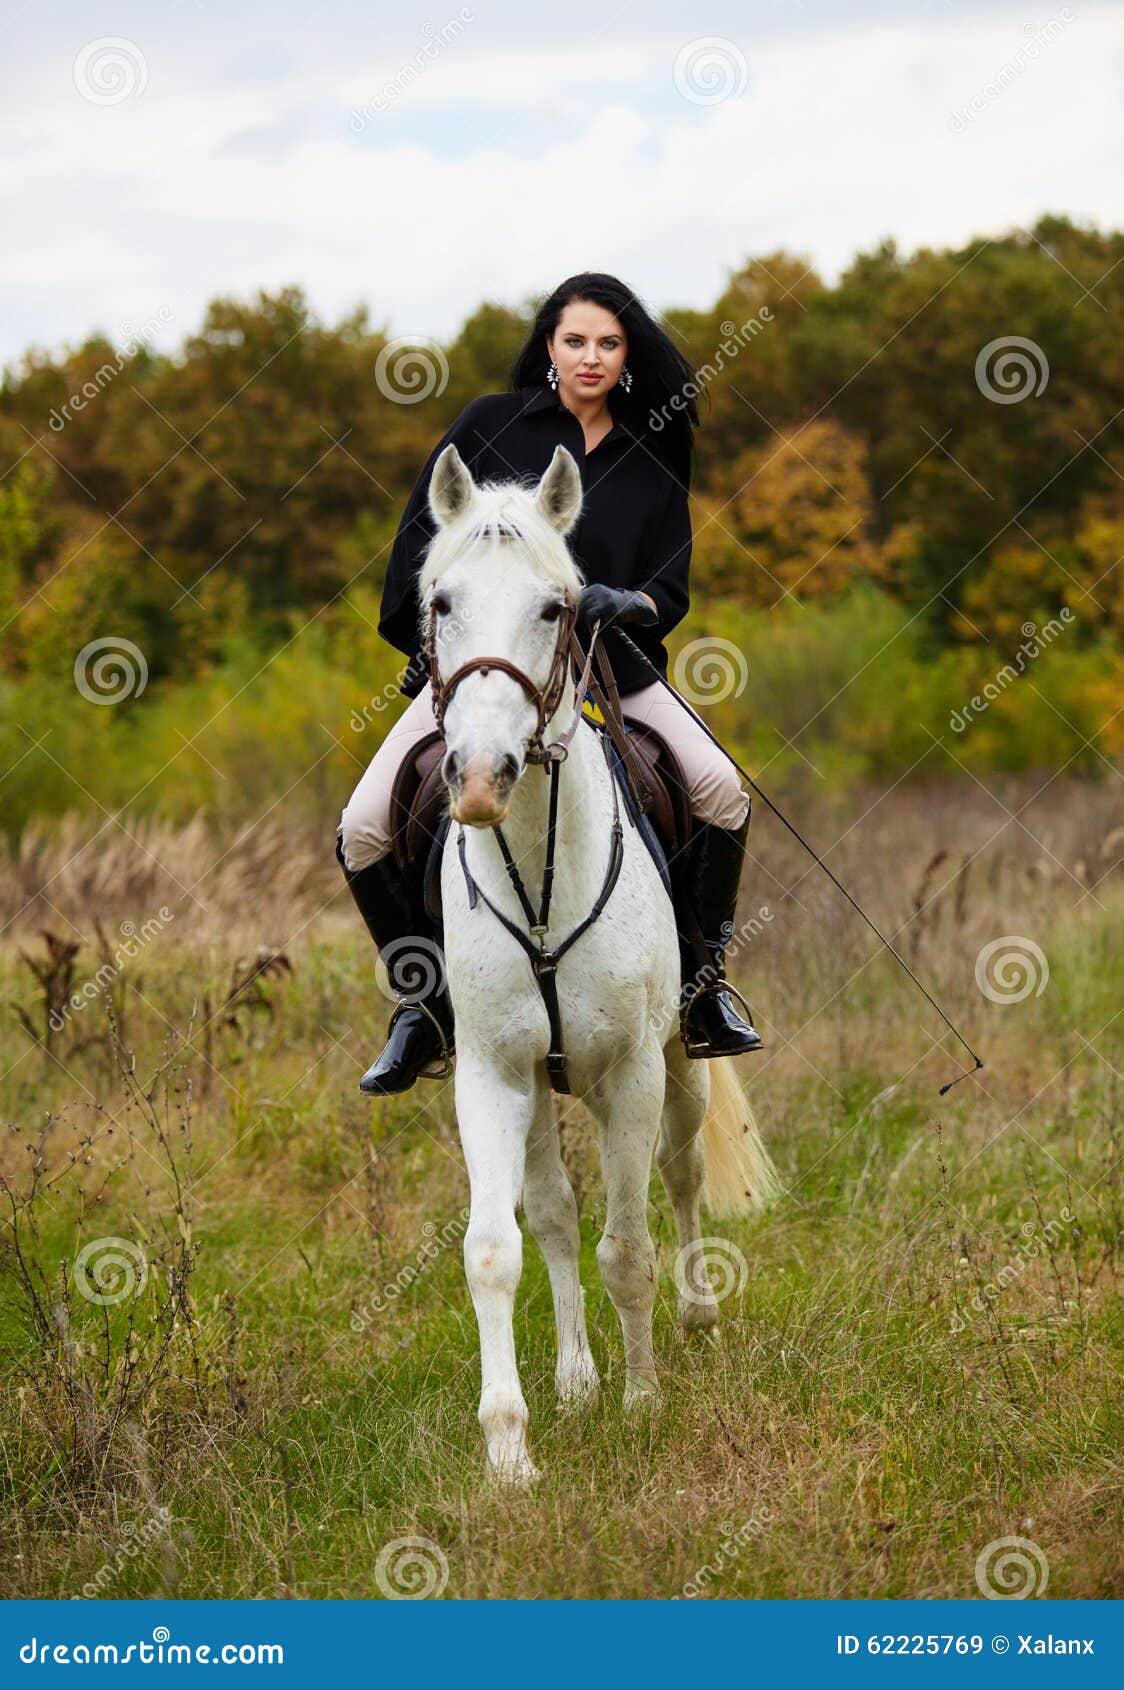 Woman Riding a Horse in the Forest Stock Image - Image of enjoy, girl ...